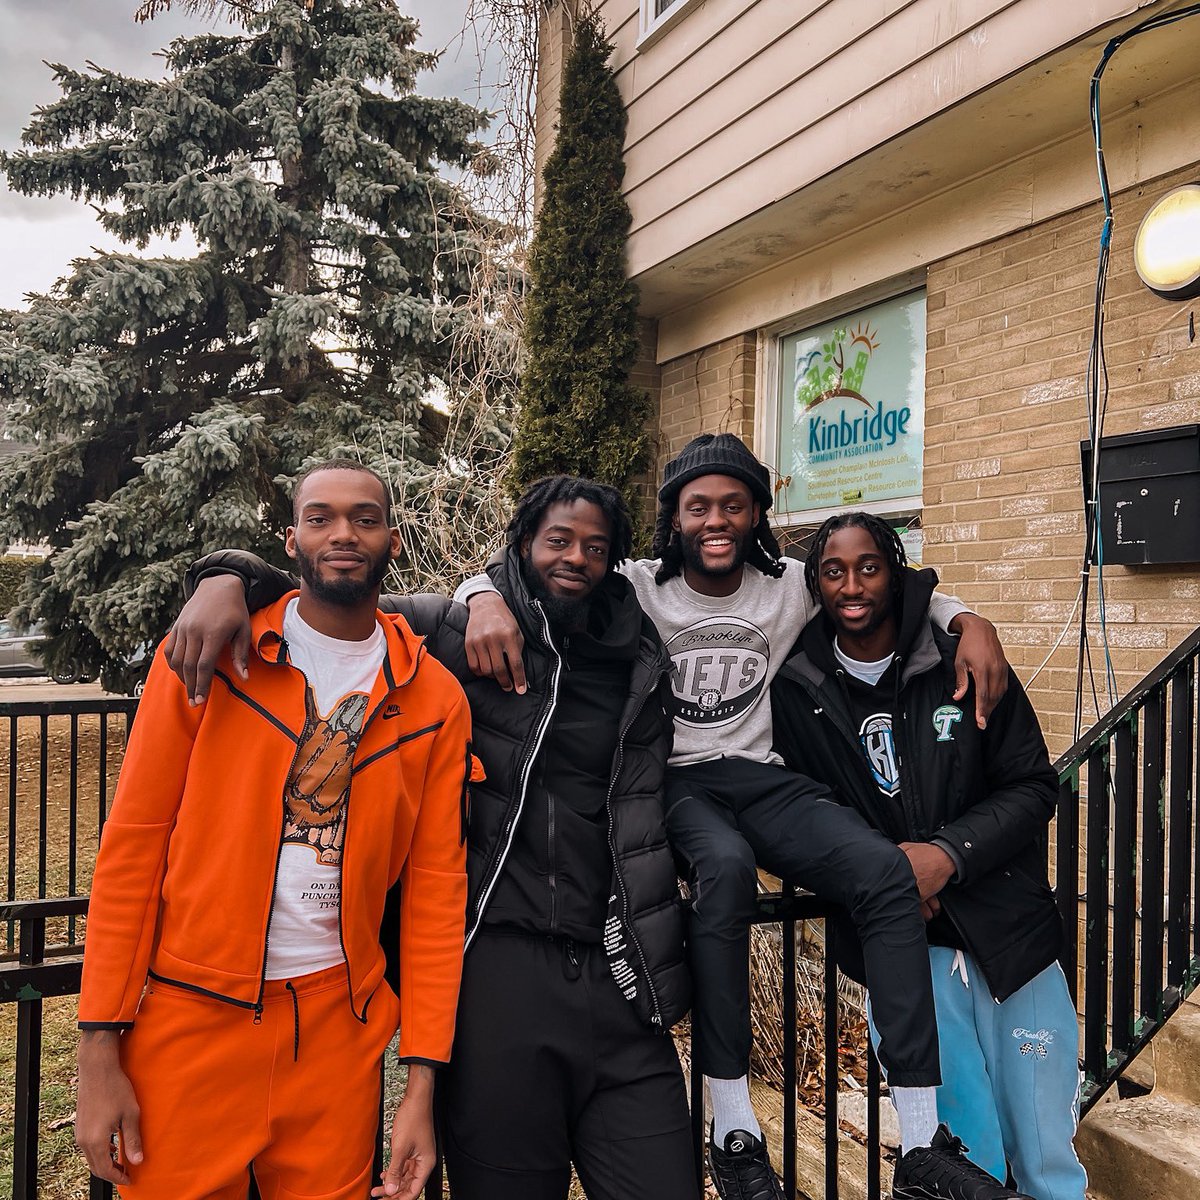 Yesterday a few of our players headed over to Kinbridge Community Association to hand out granola bars, books and socks to children as they got off the bus. 

Being involved in the community and connecting with the youth is extremely important to us.